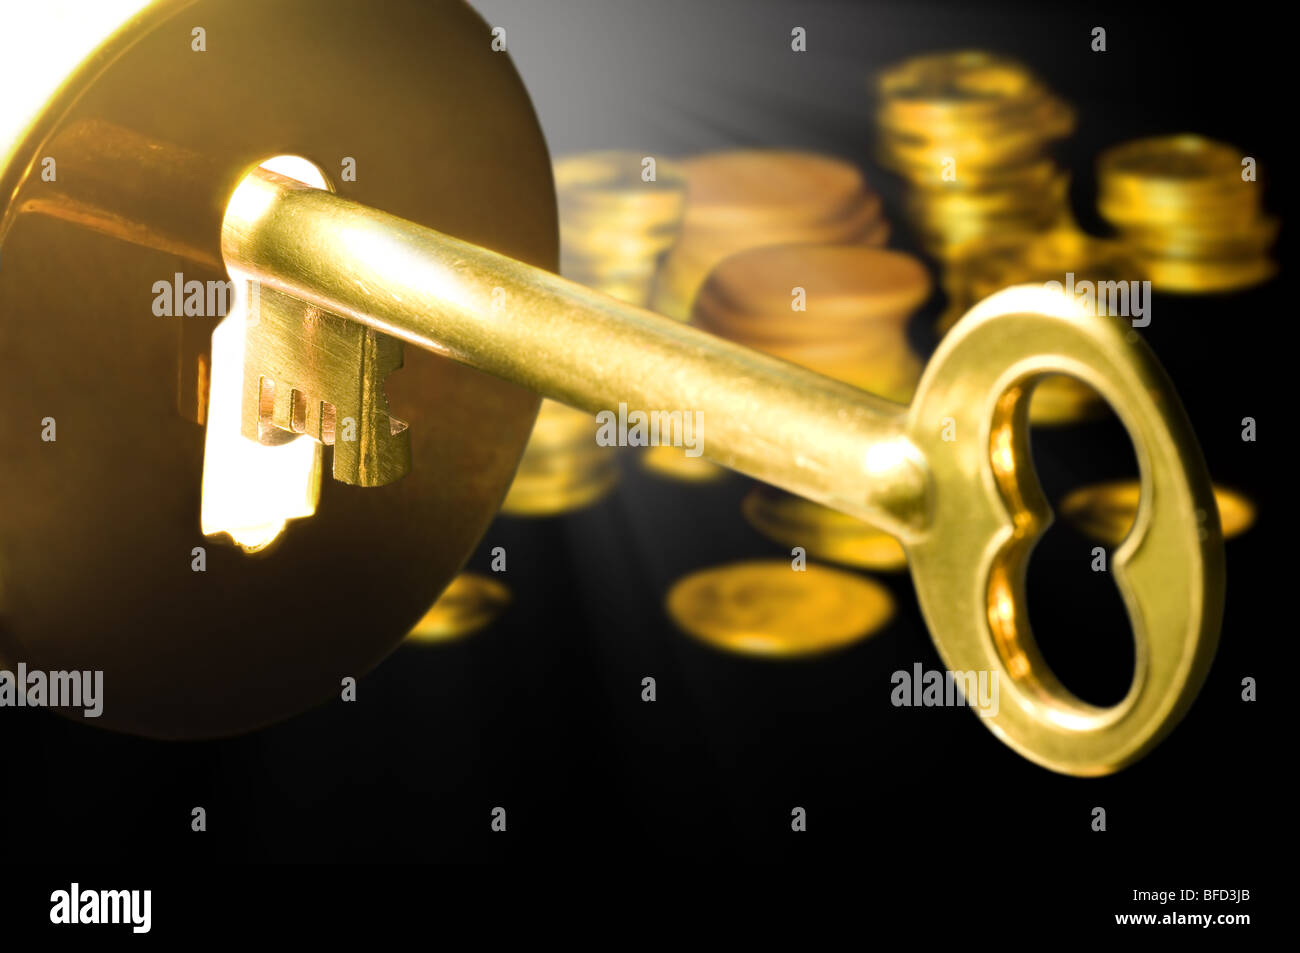 Golden key to the fortune with columns of coins in the background. Stock Photo